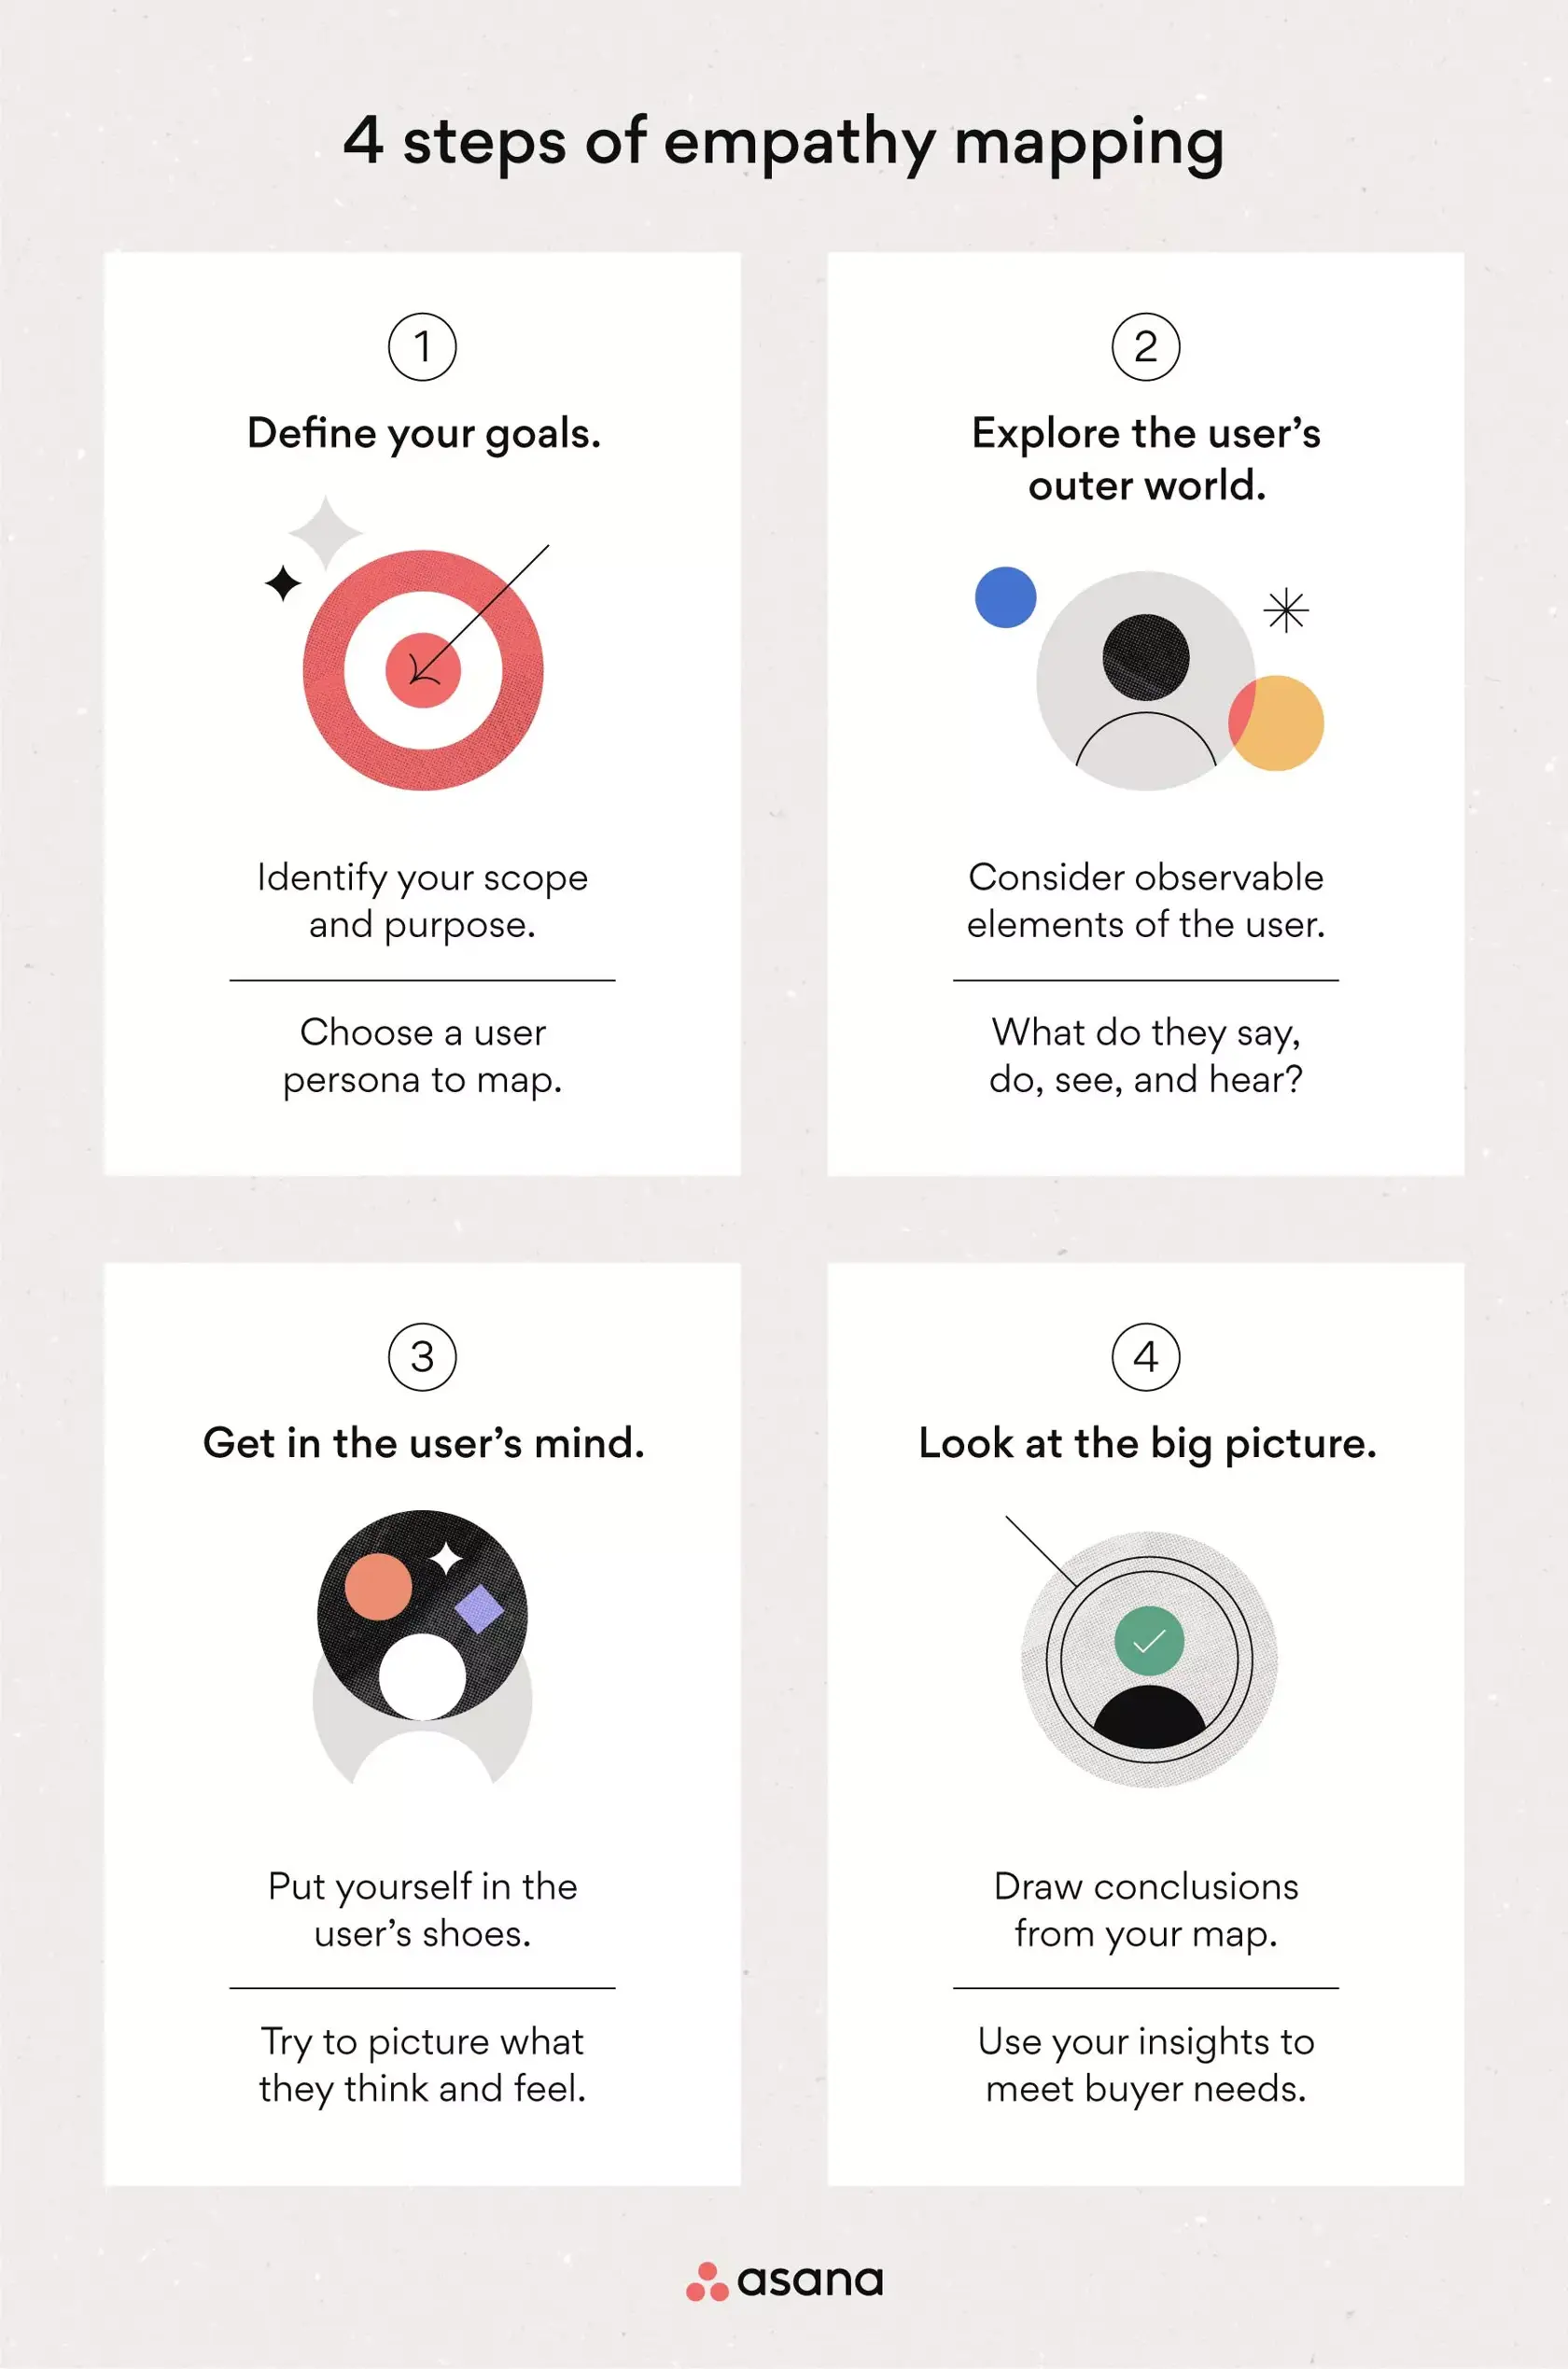 [inline illustration] 4 steps of empathy mapping (infographic)